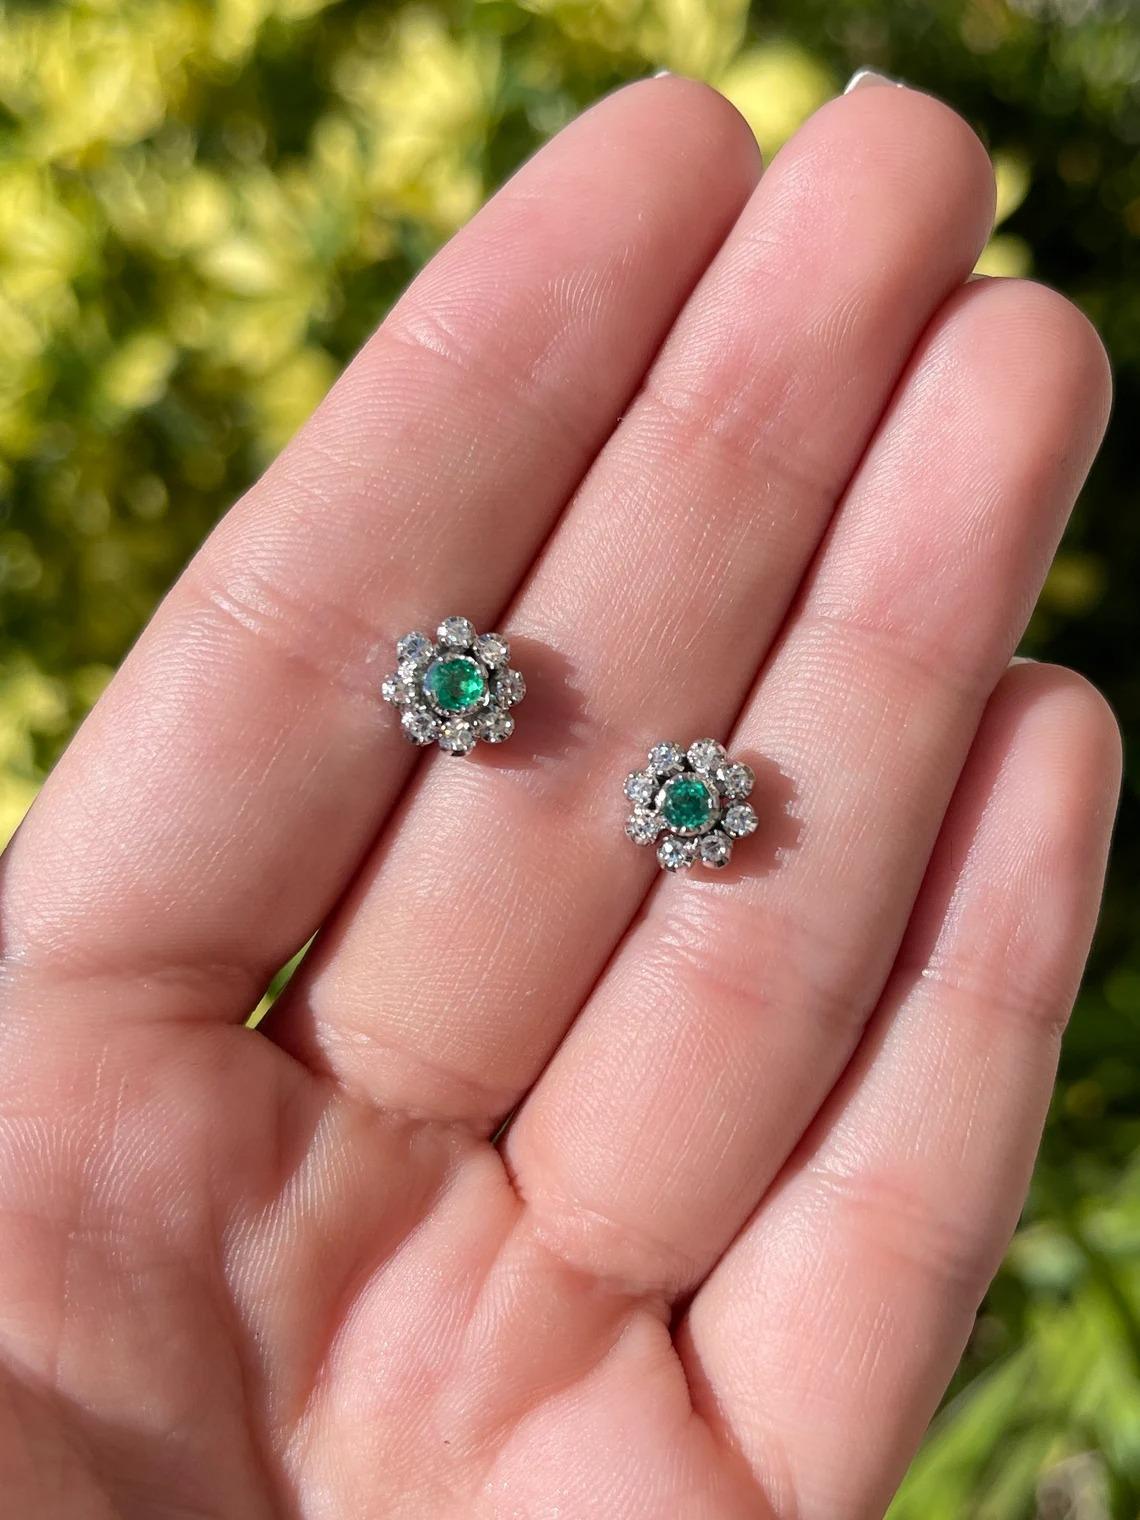 A beautiful pair of emerald and diamond stud earrings. The center stone features a round-cut, Colombian emerald with superb qualities. Surrounding the center stone are eight brilliant round cut diamonds creating the perfect halo effect. Carefully